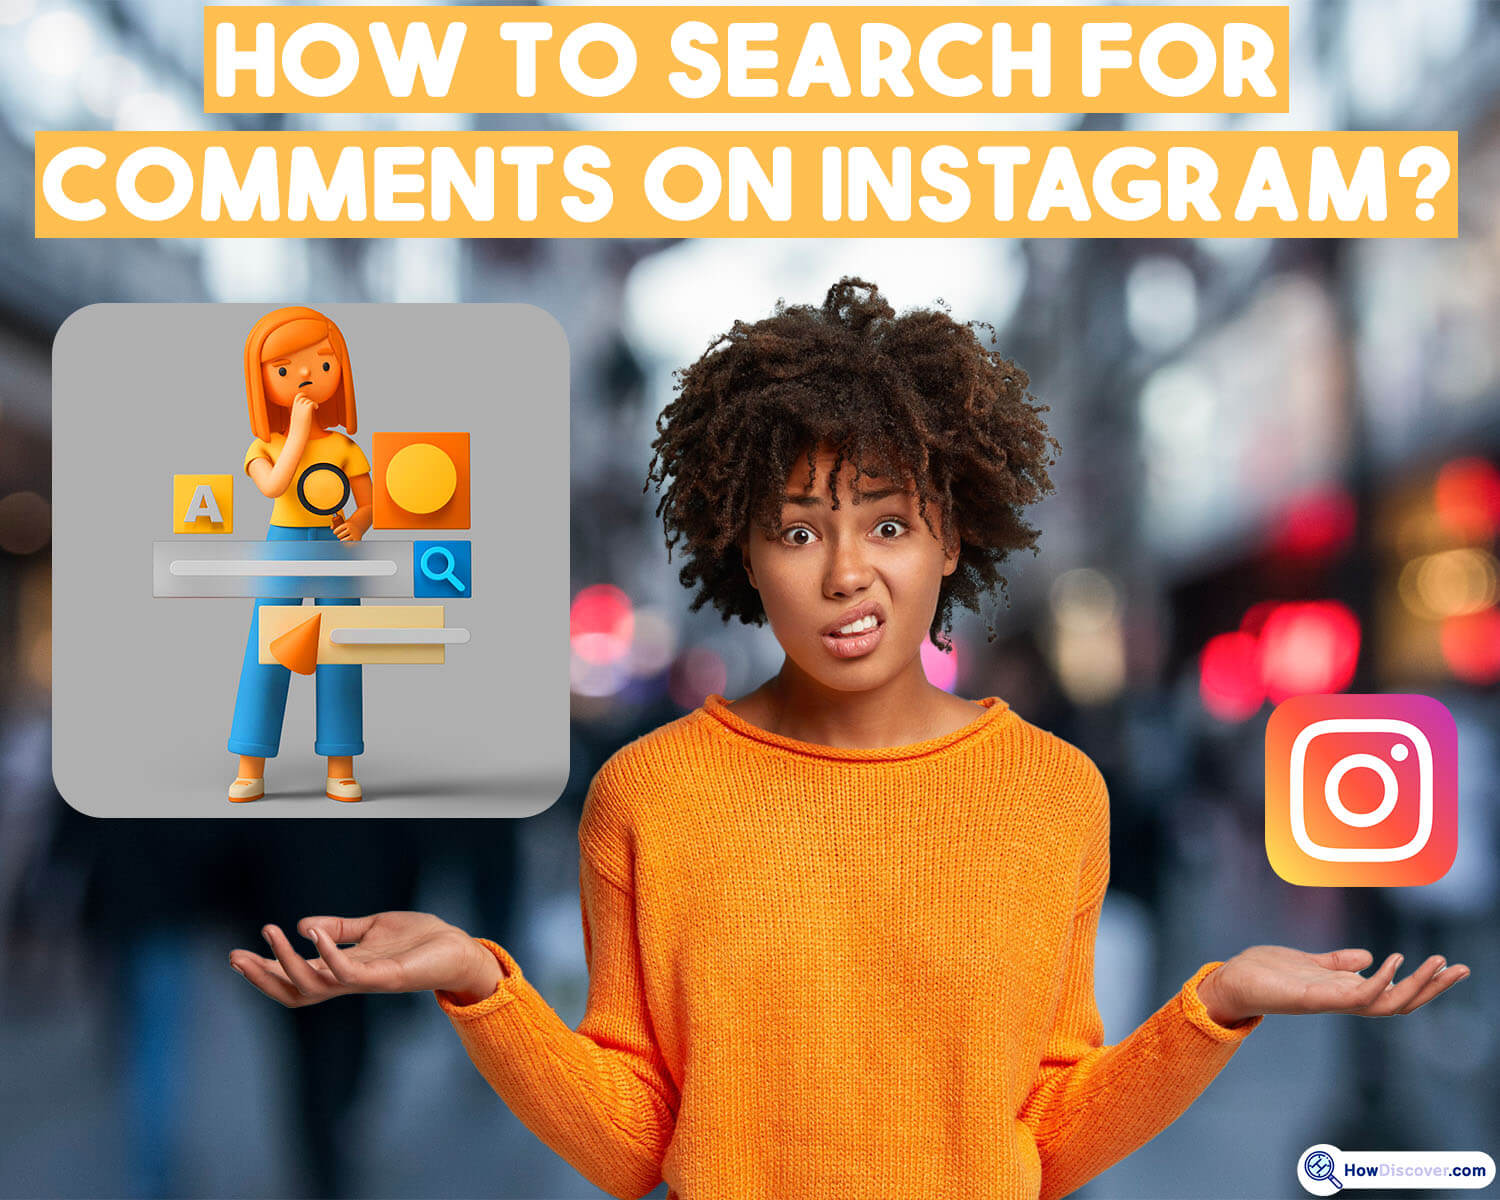 How to Search For Comments on Instagram